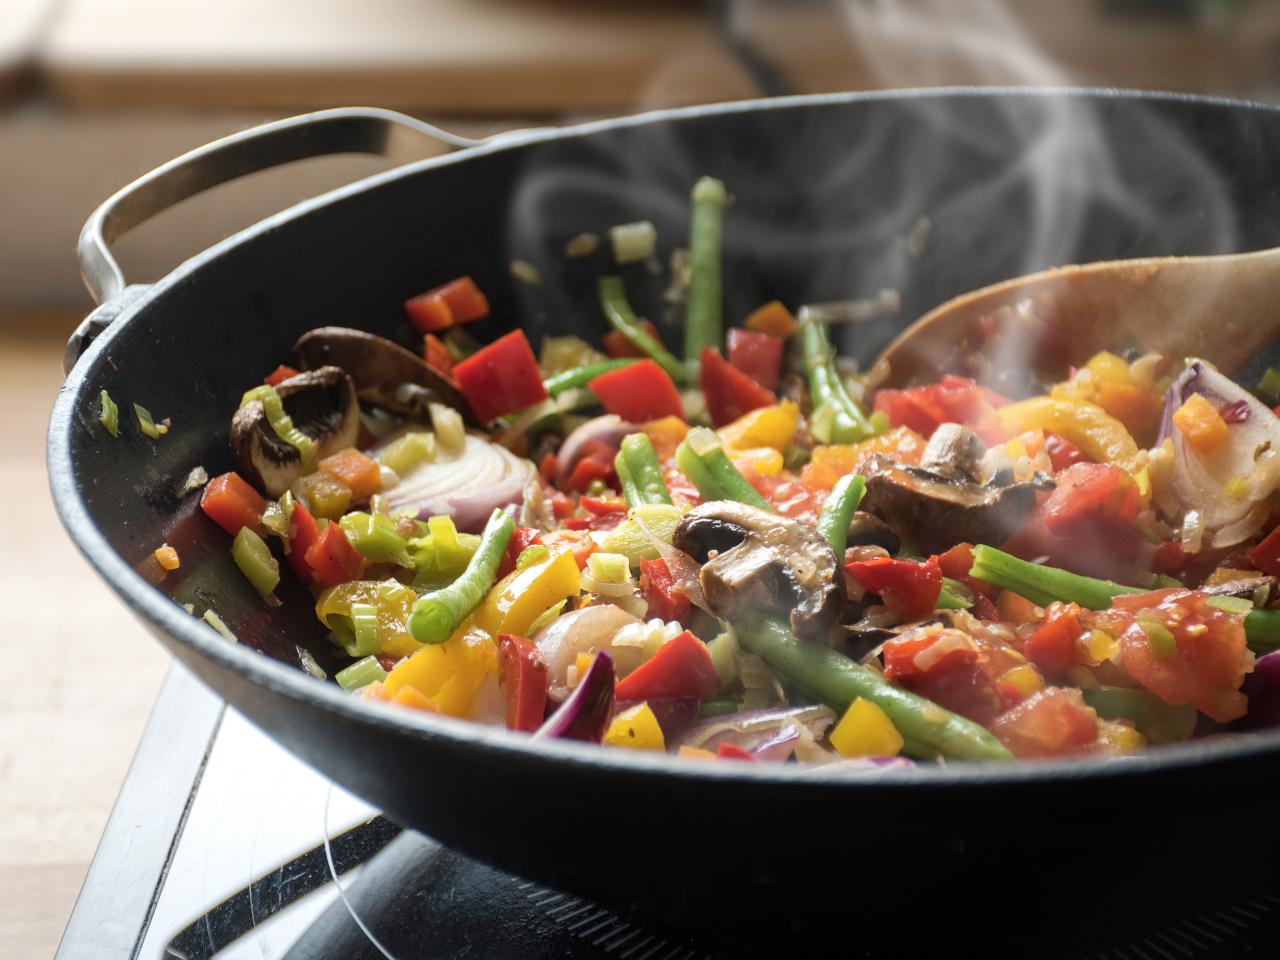 How to Season a Wok  A step-by-step guide by Wok & Skillet